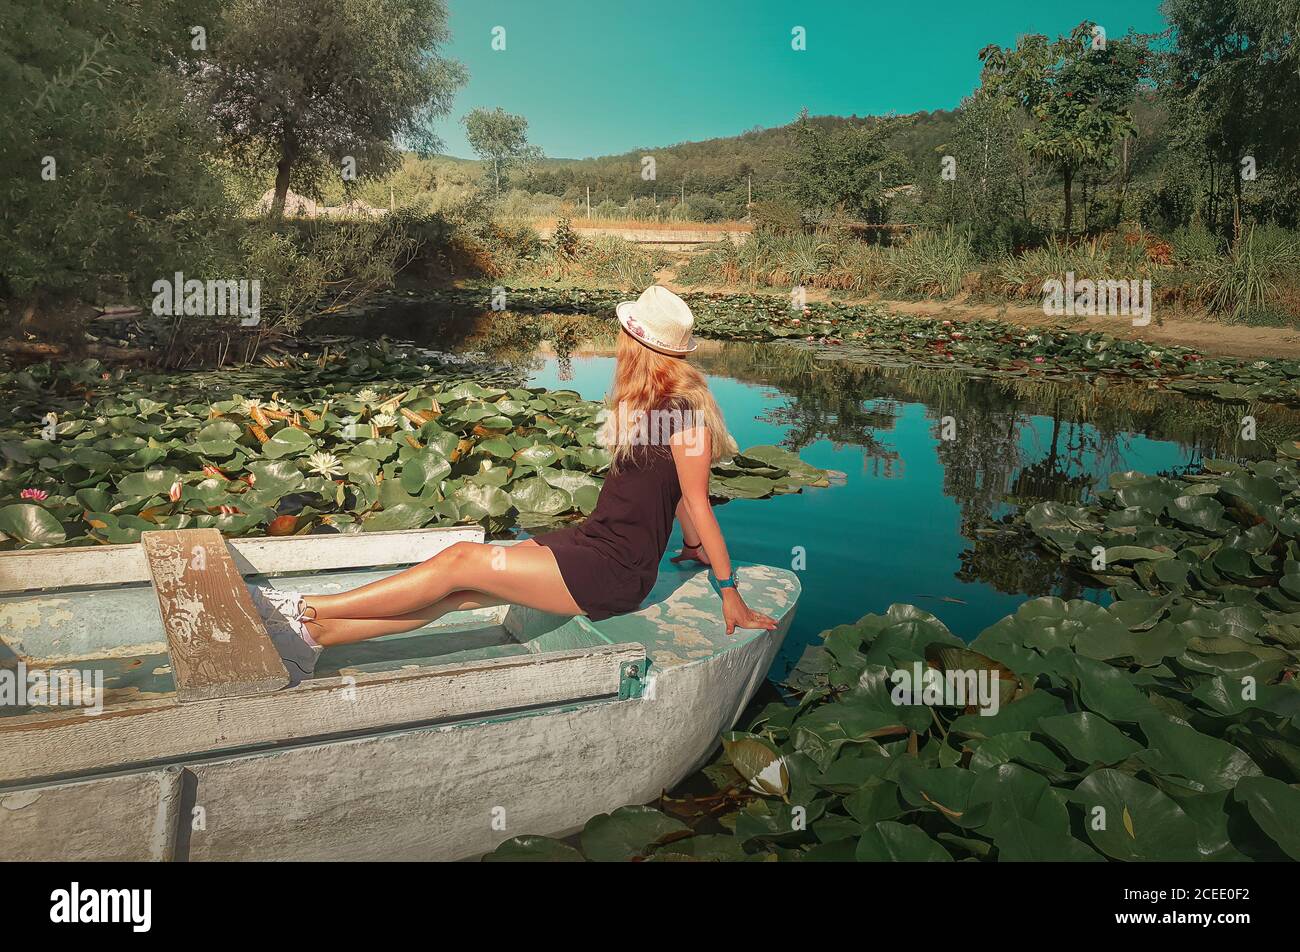 Carefree young woman floating relaxed on a boat at a pond with blooming waterlily, lotus flowers. Vacation travel, natural background at the lake with Stock Photo